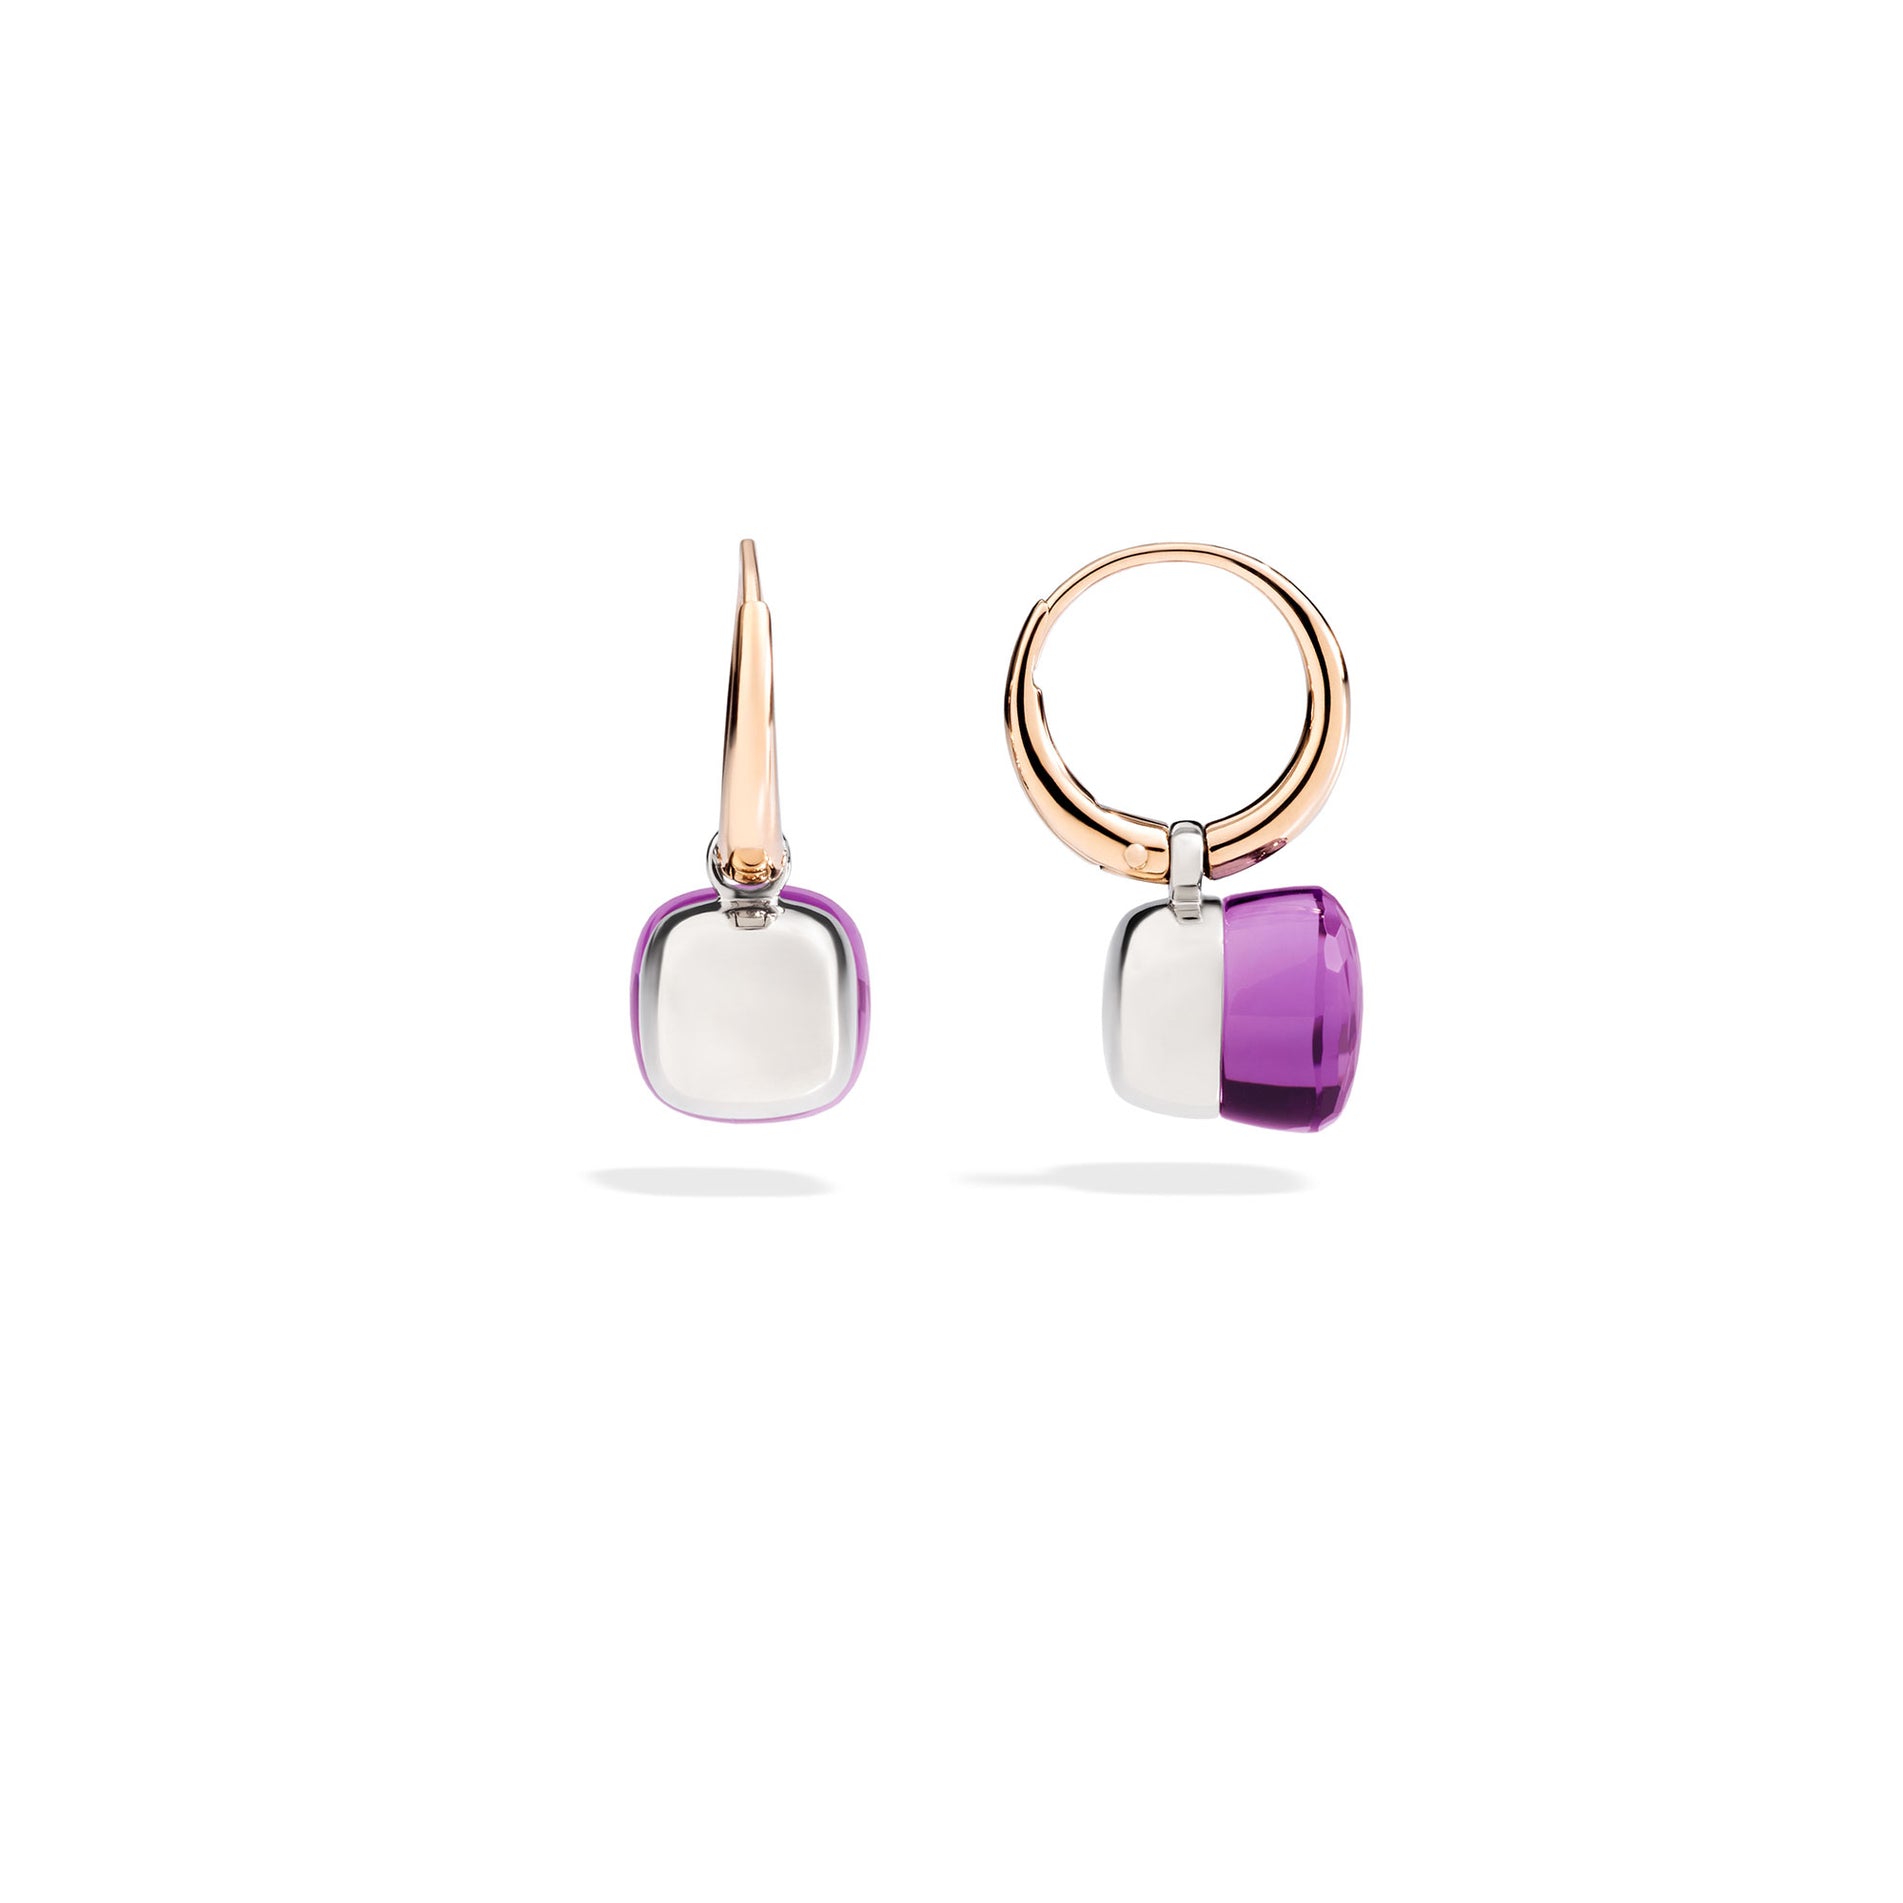 Nudo Petit Earrings in 18k Rose Gold and White Gold with Amethyst - Orsini Jewellers NZ